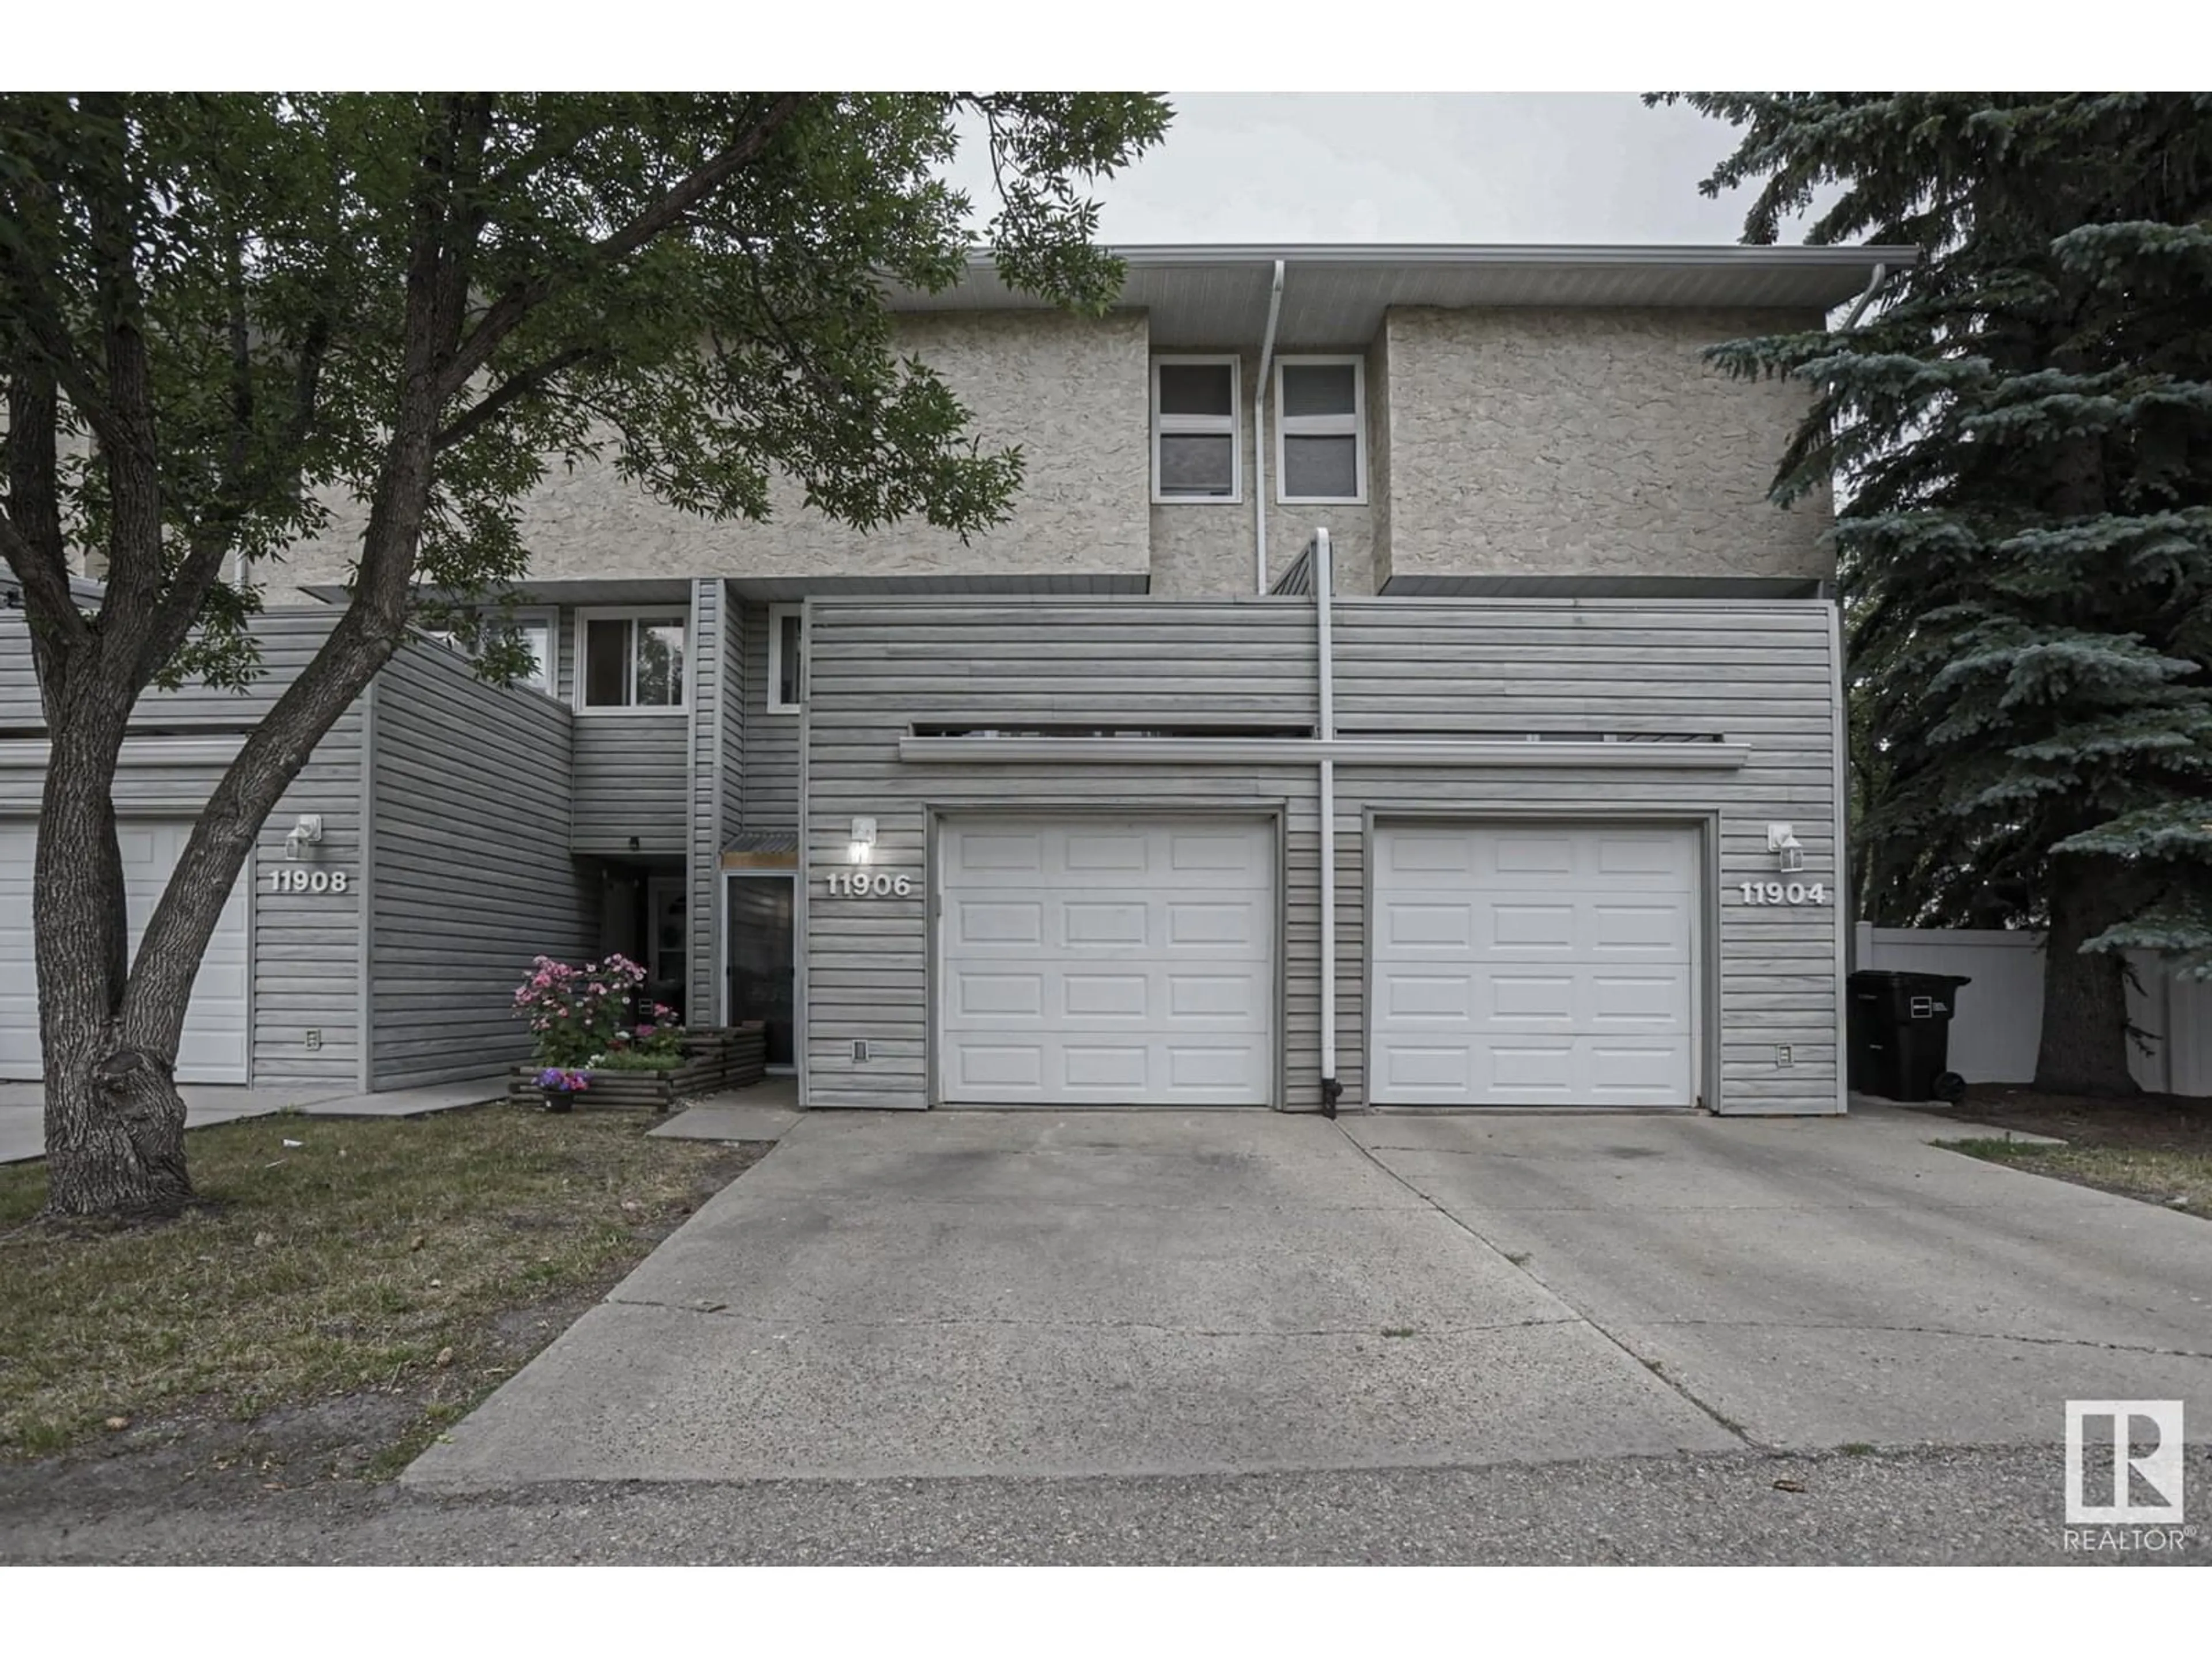 A pic from exterior of the house or condo for 11906 145 AV NW, Edmonton Alberta T5X1T6